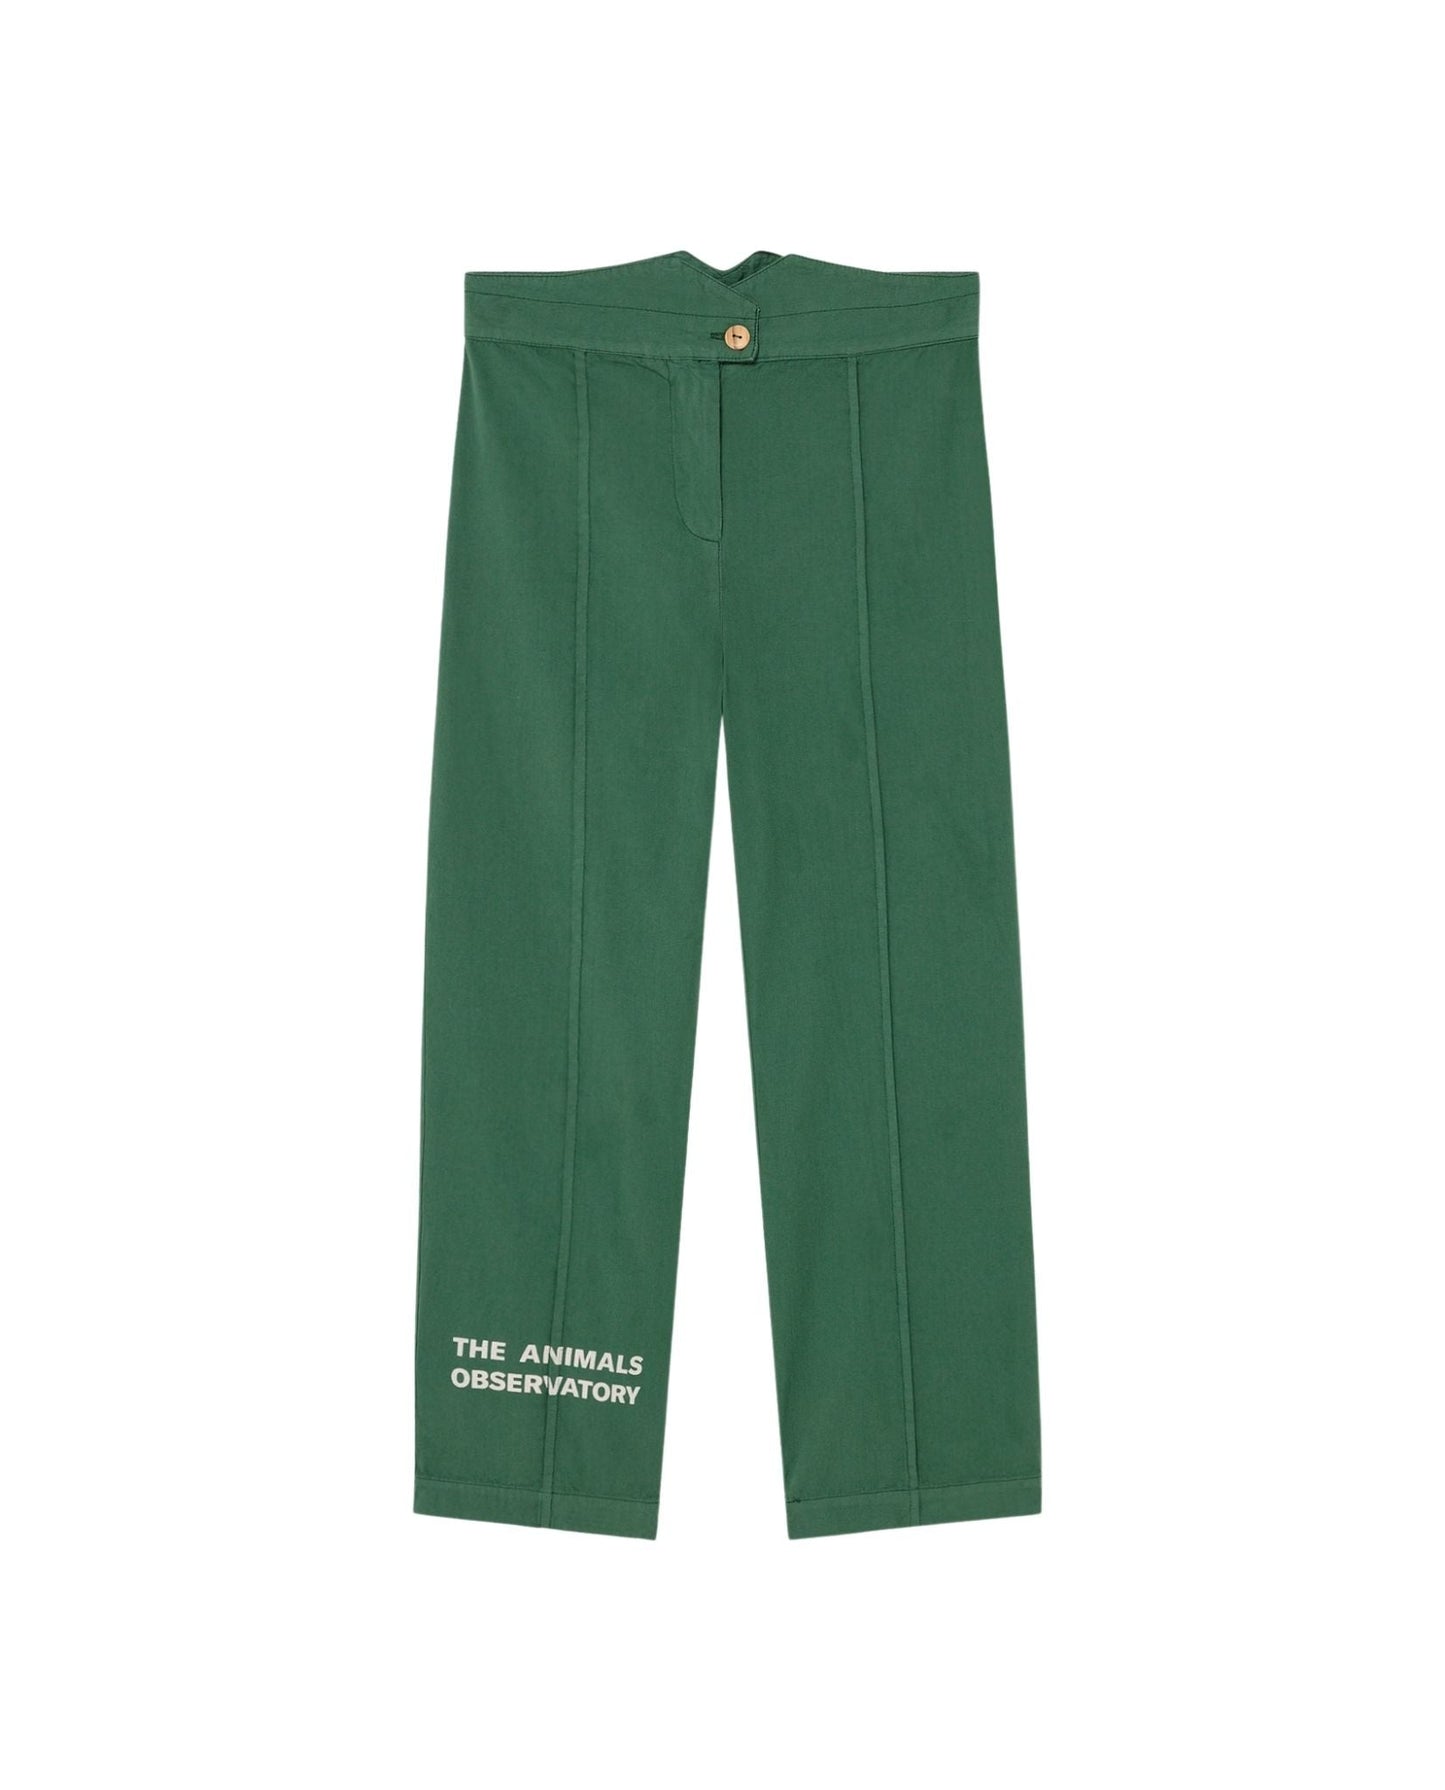 Porcupine kids pants green the animals Trousers The Animals Observatory 